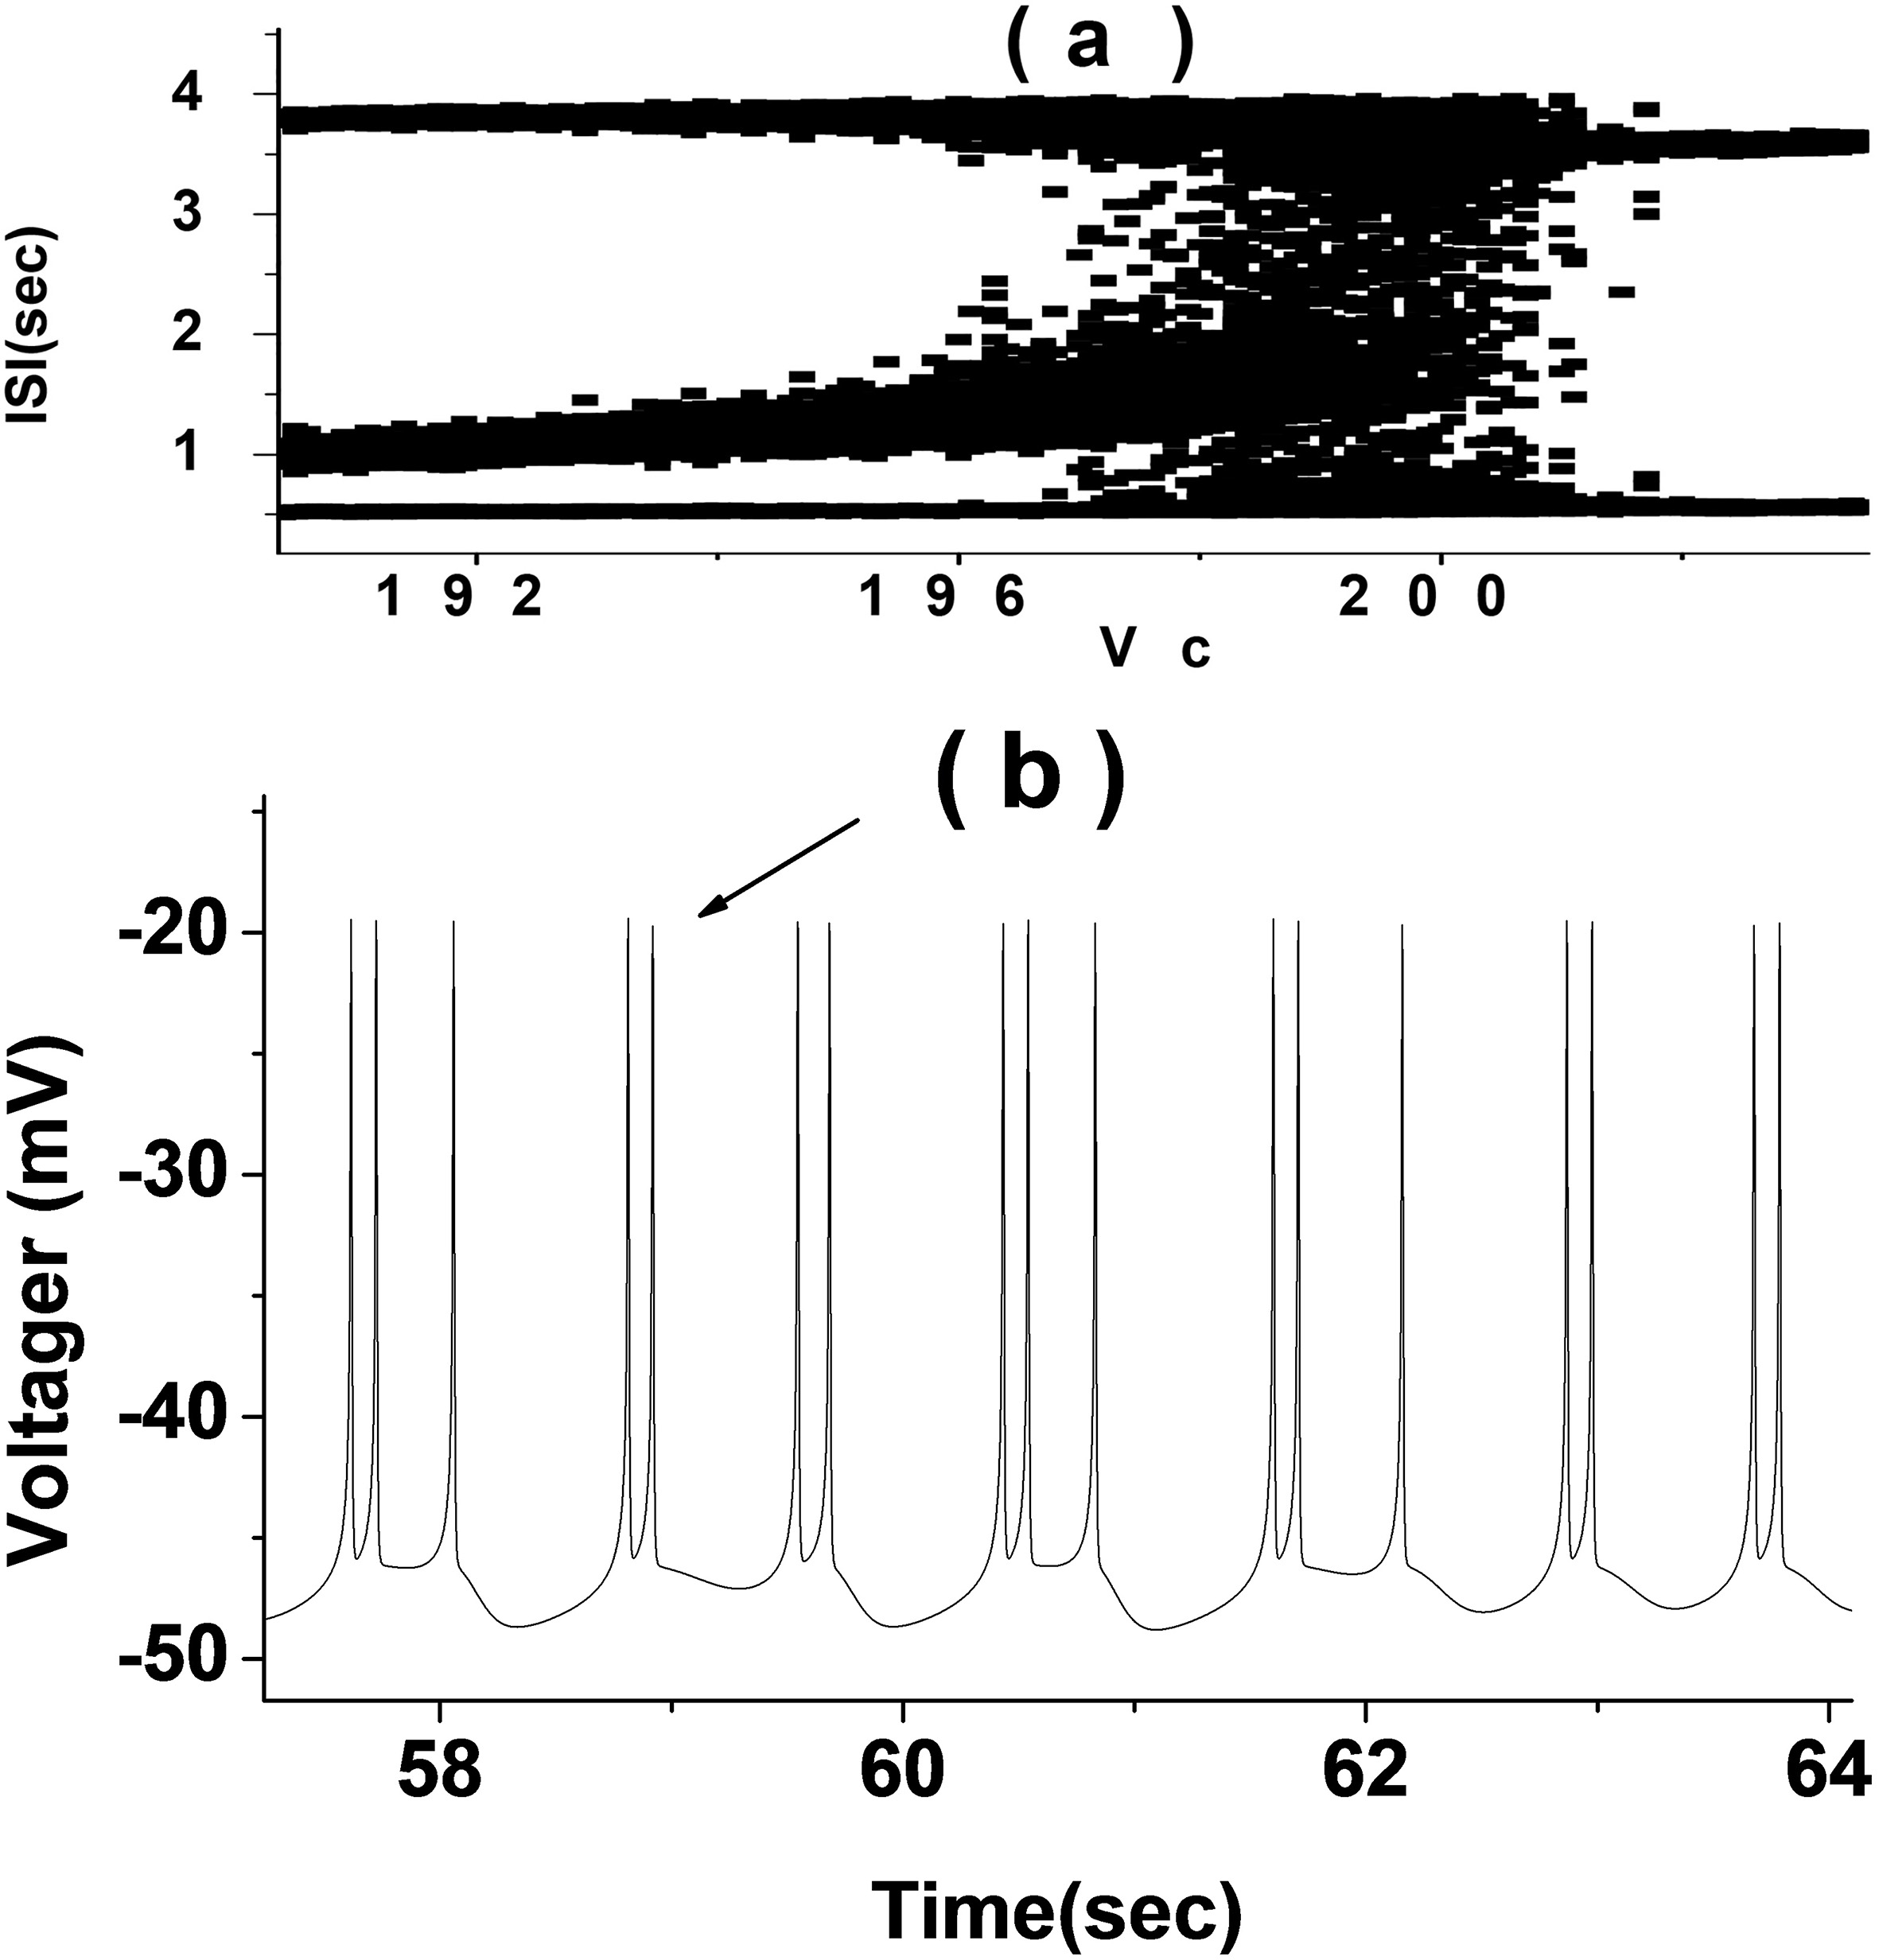 (a) bifurcation sequence between period 2 and 3 bursting, (b) chaotic discharge rhythm trajectory diagram with period 2 and 3 bursting (vc= 199.5 mV).